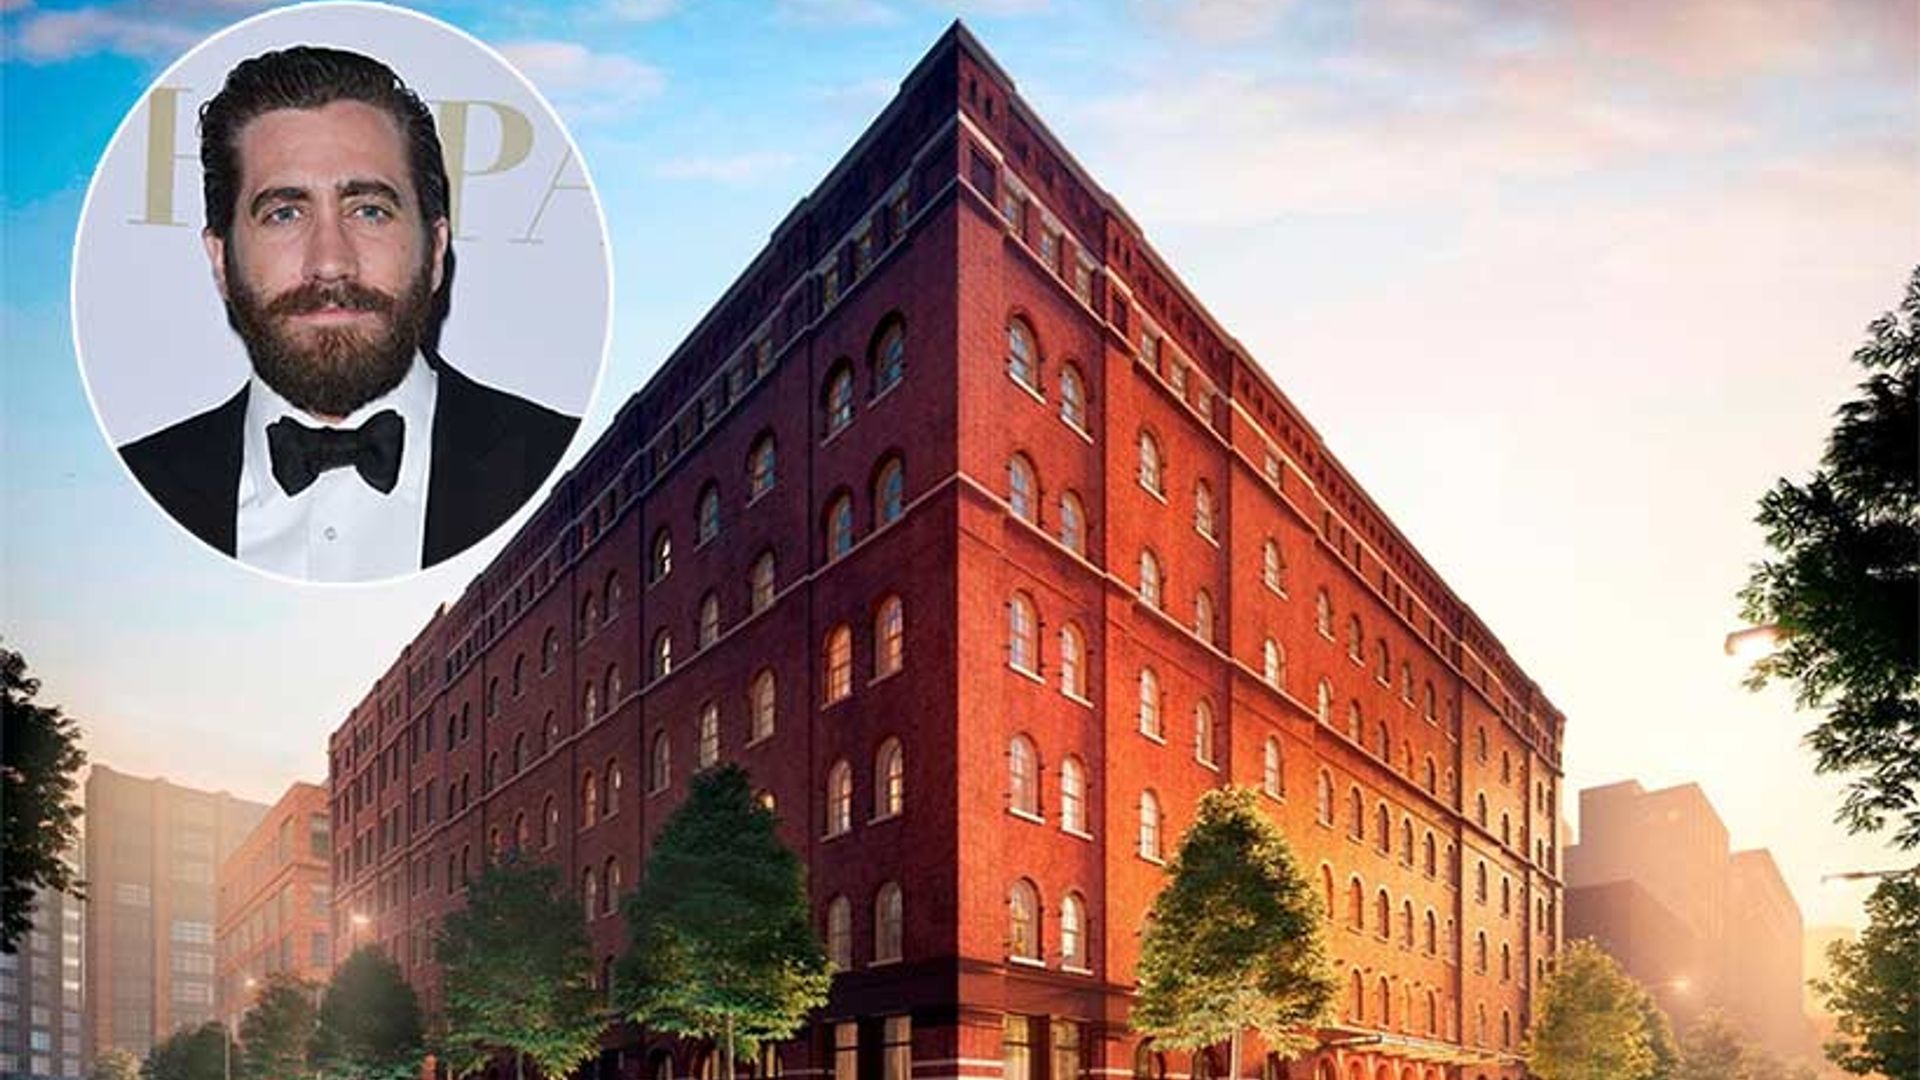 Jake Gyllenhaal buys £6.8million apartment in the most star-studded building in New York